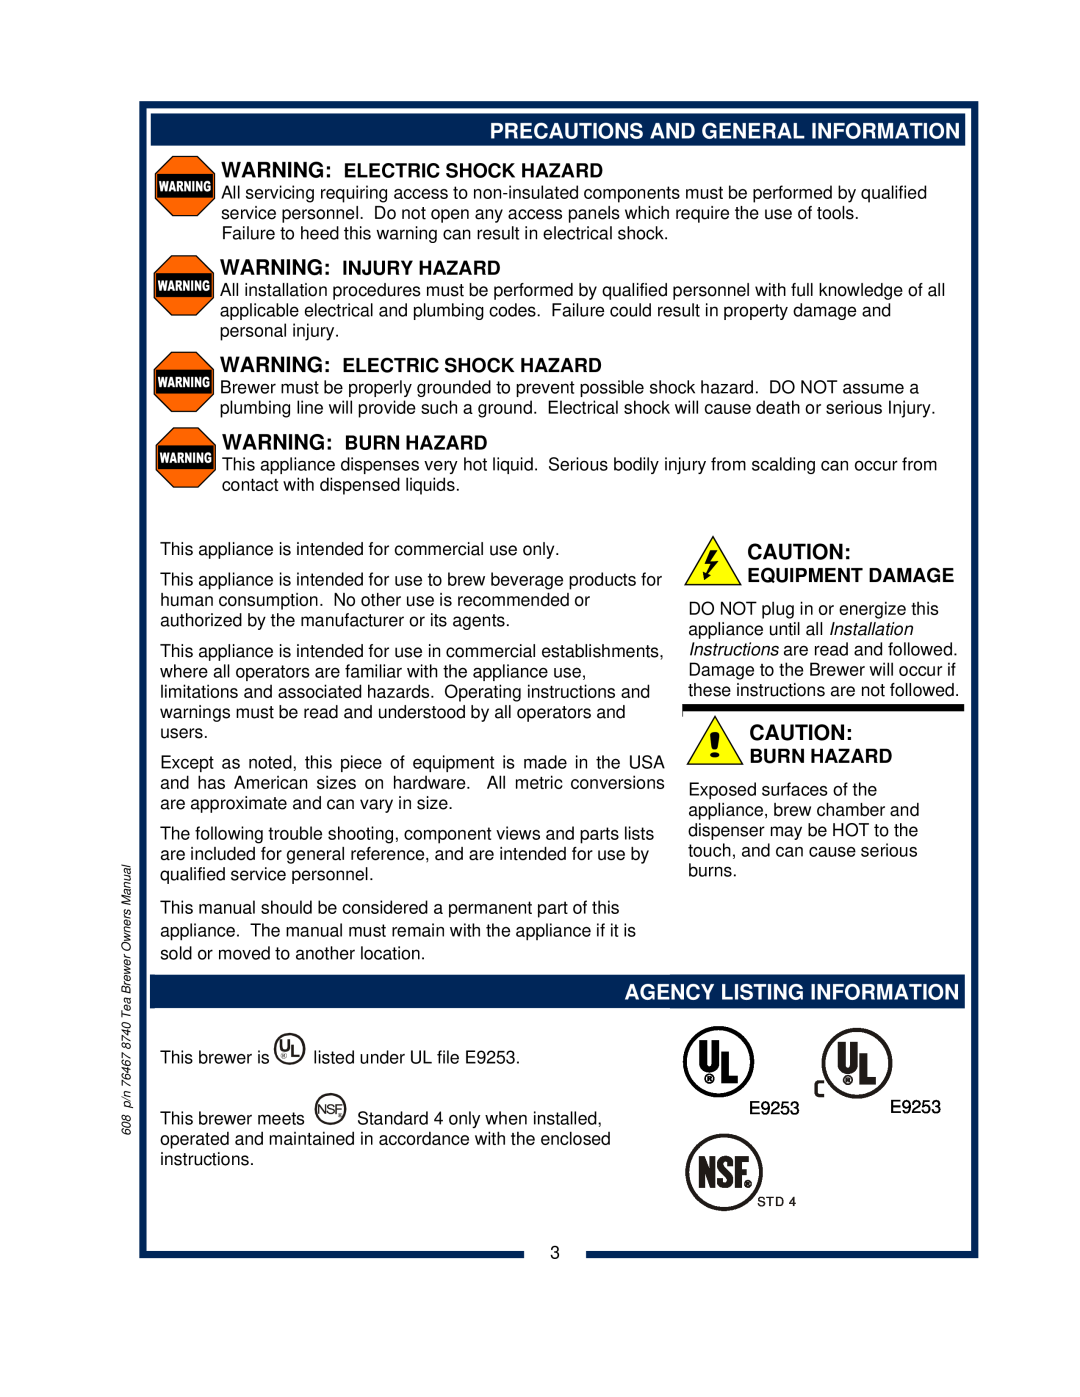 Bloomfield 8740 owner manual Precautions And General Information, Agency Listing Information, Warning Electric Shock Hazard 